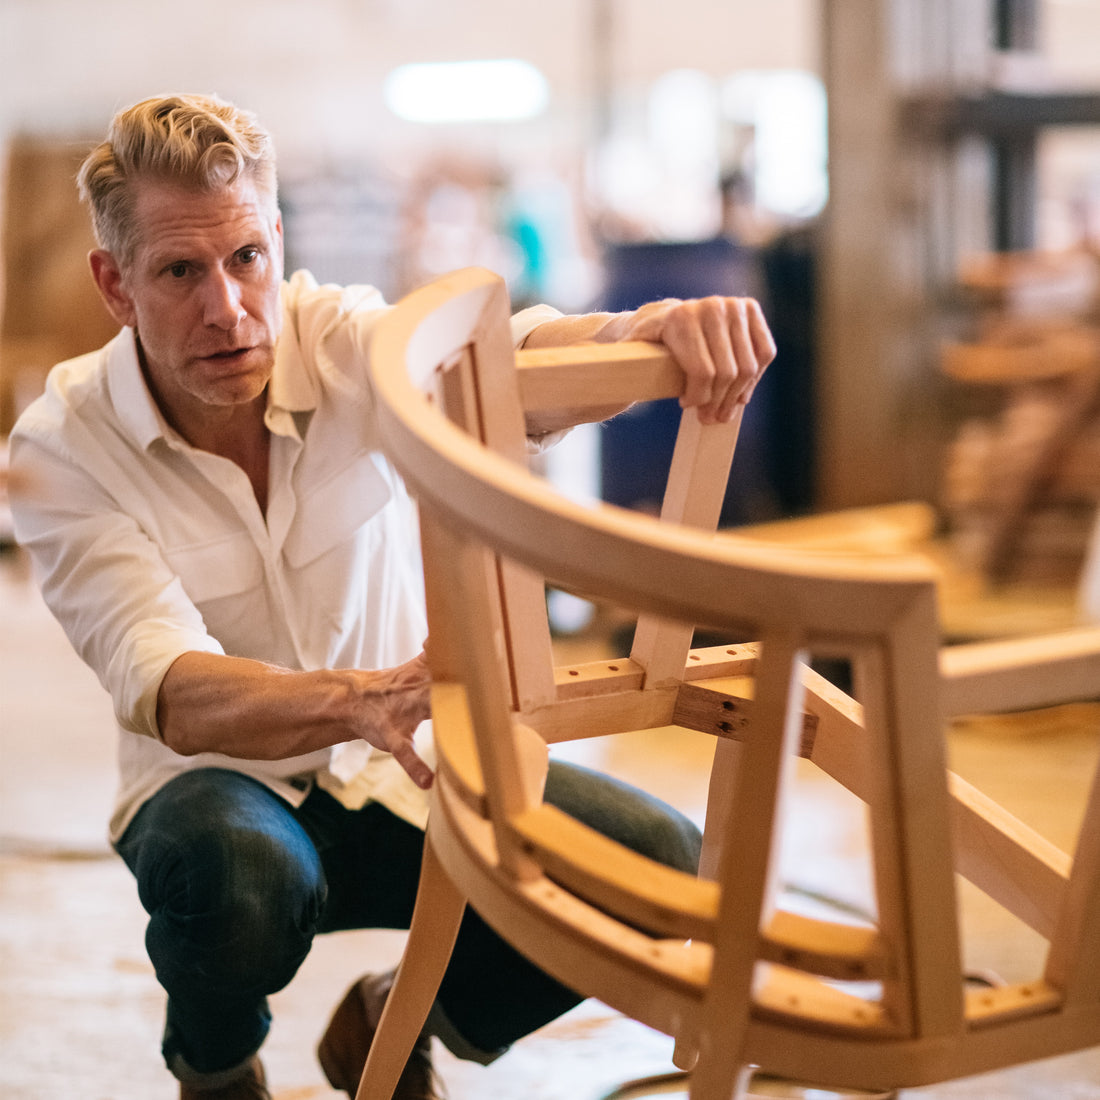 Duncan Hughes for Dowel: Behind the Scenes